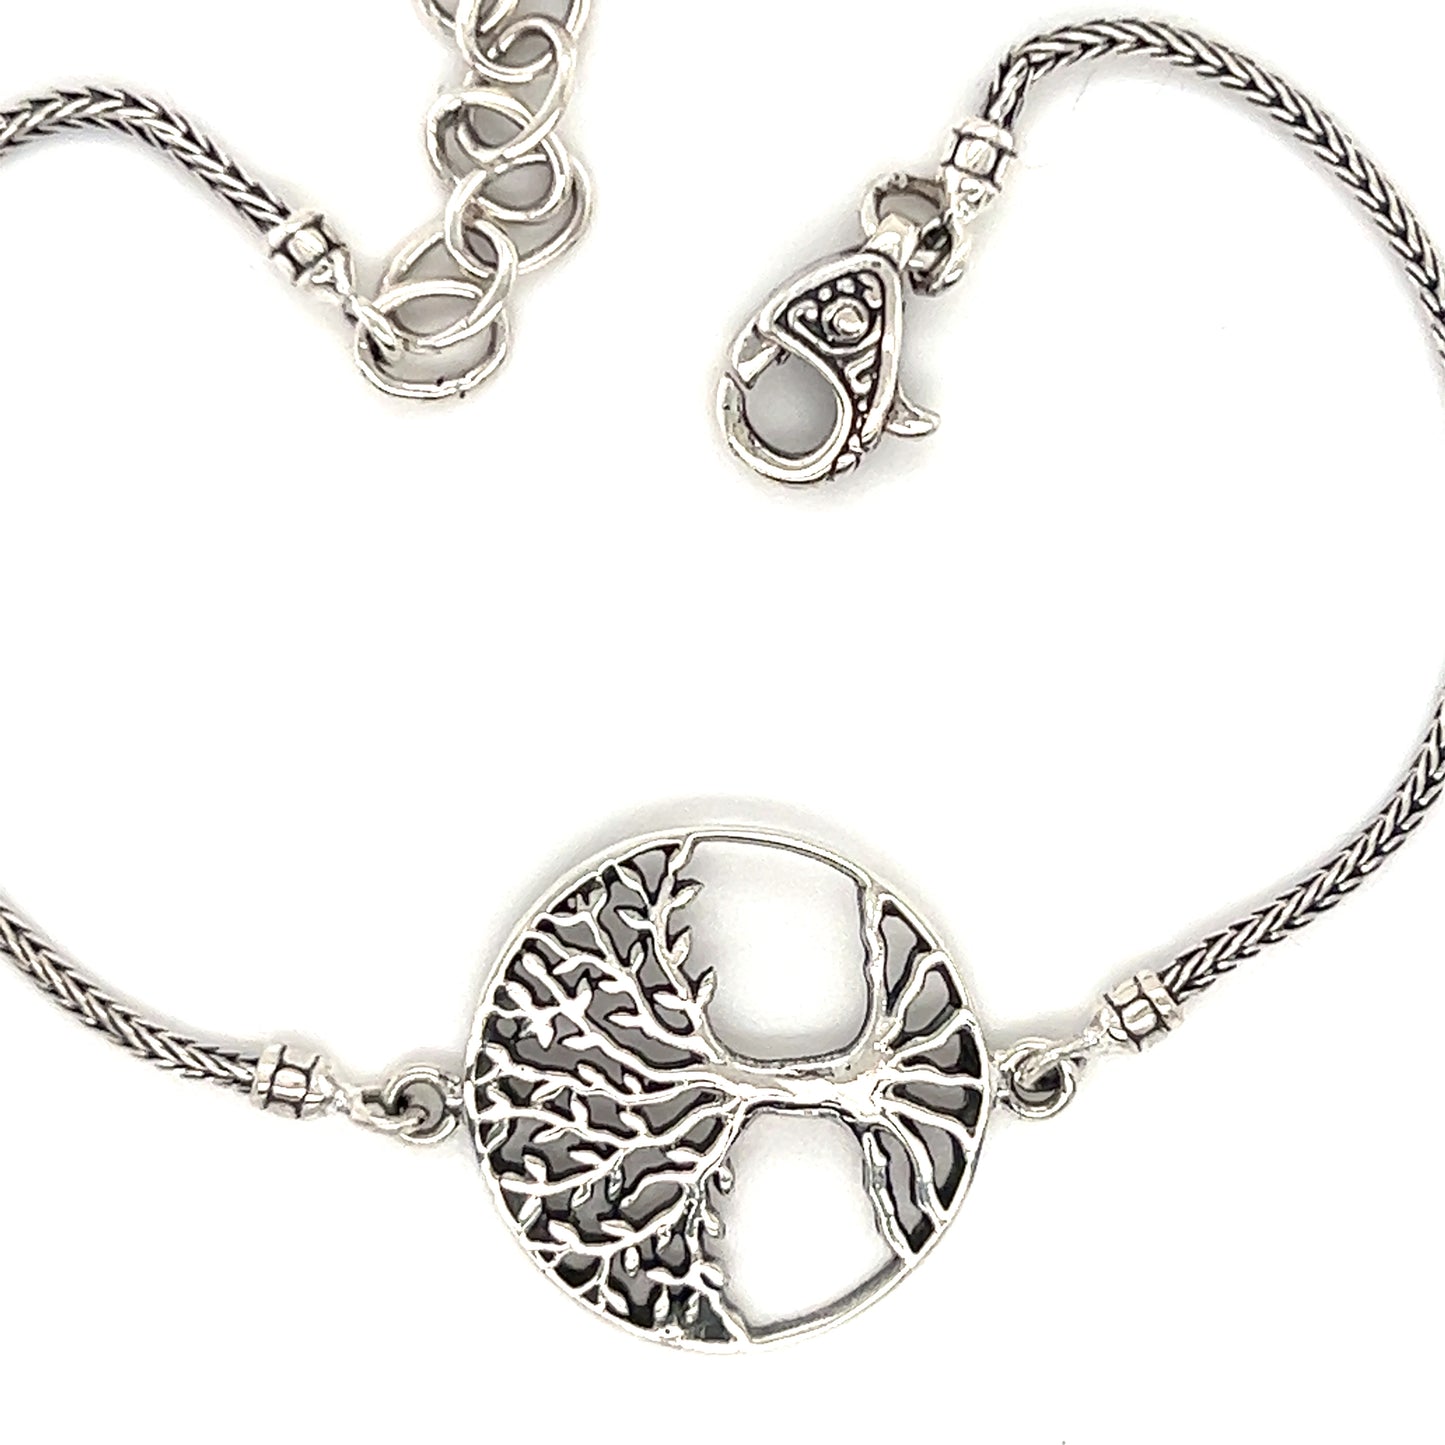 This Super Silver Tree of life Bracelet features a stunning tree of life design.